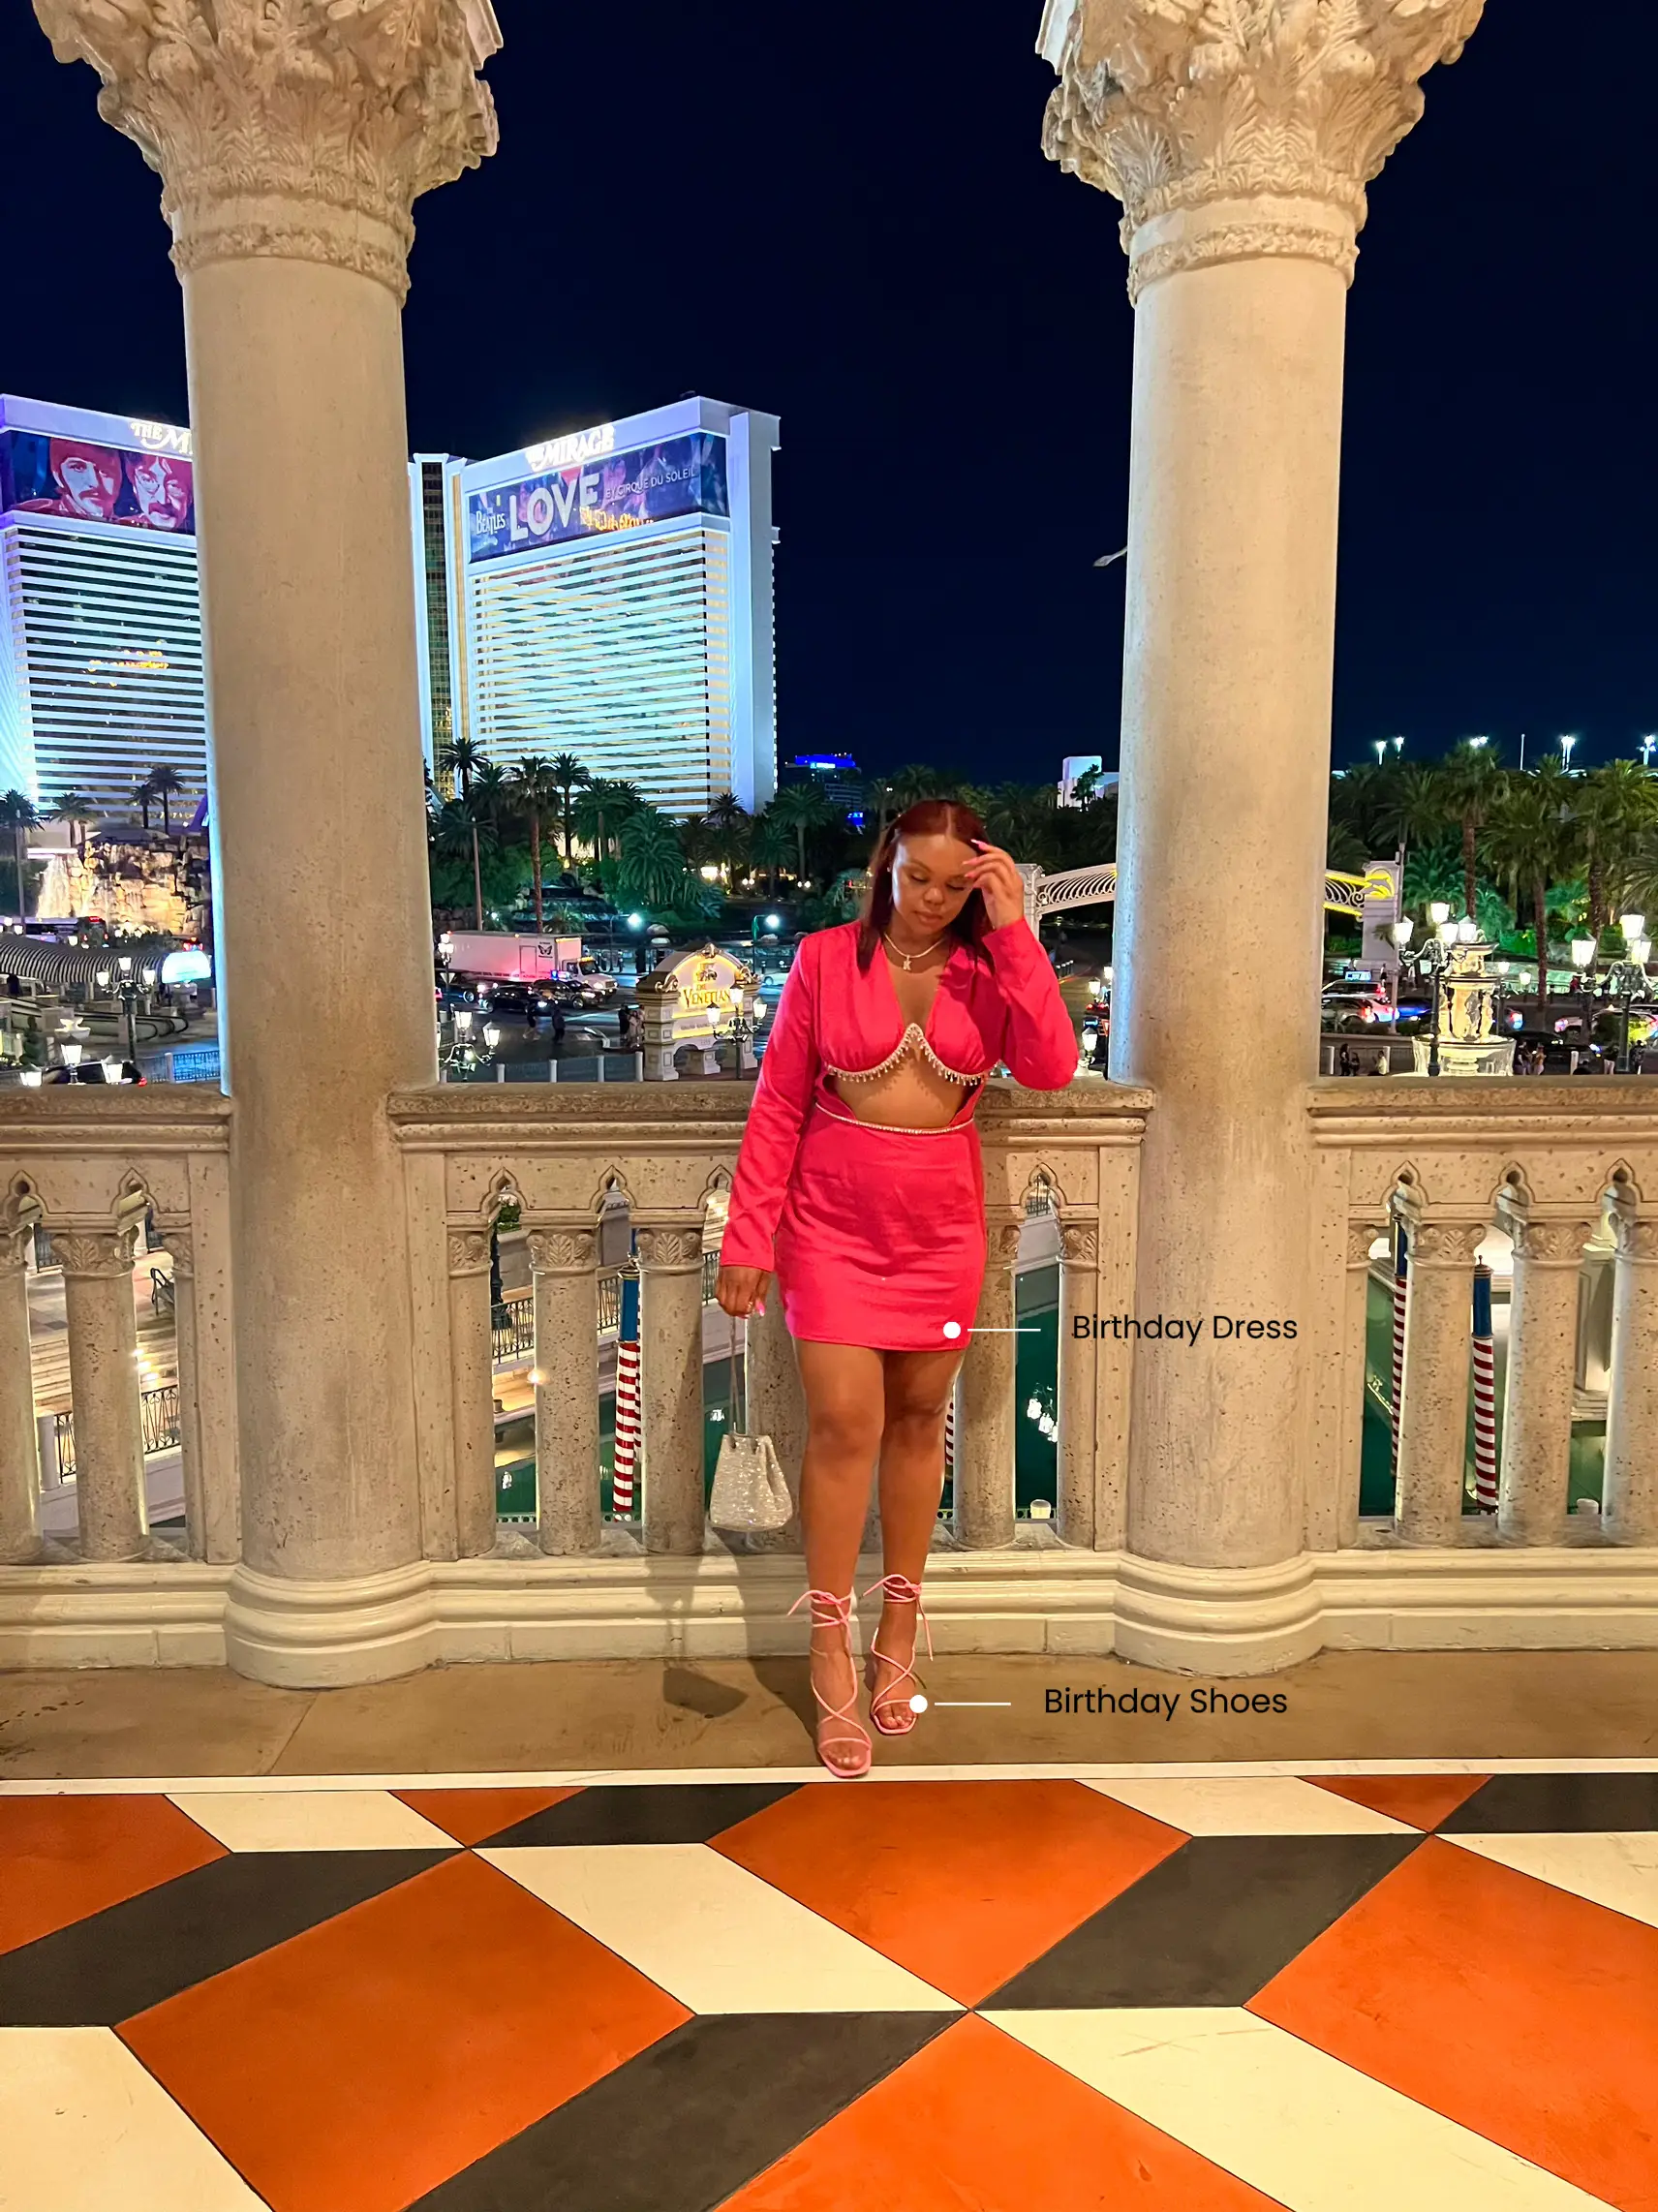 ❤ ℒℴvℯly  Vegas outfit, Vegas dresses, Pool party outfits